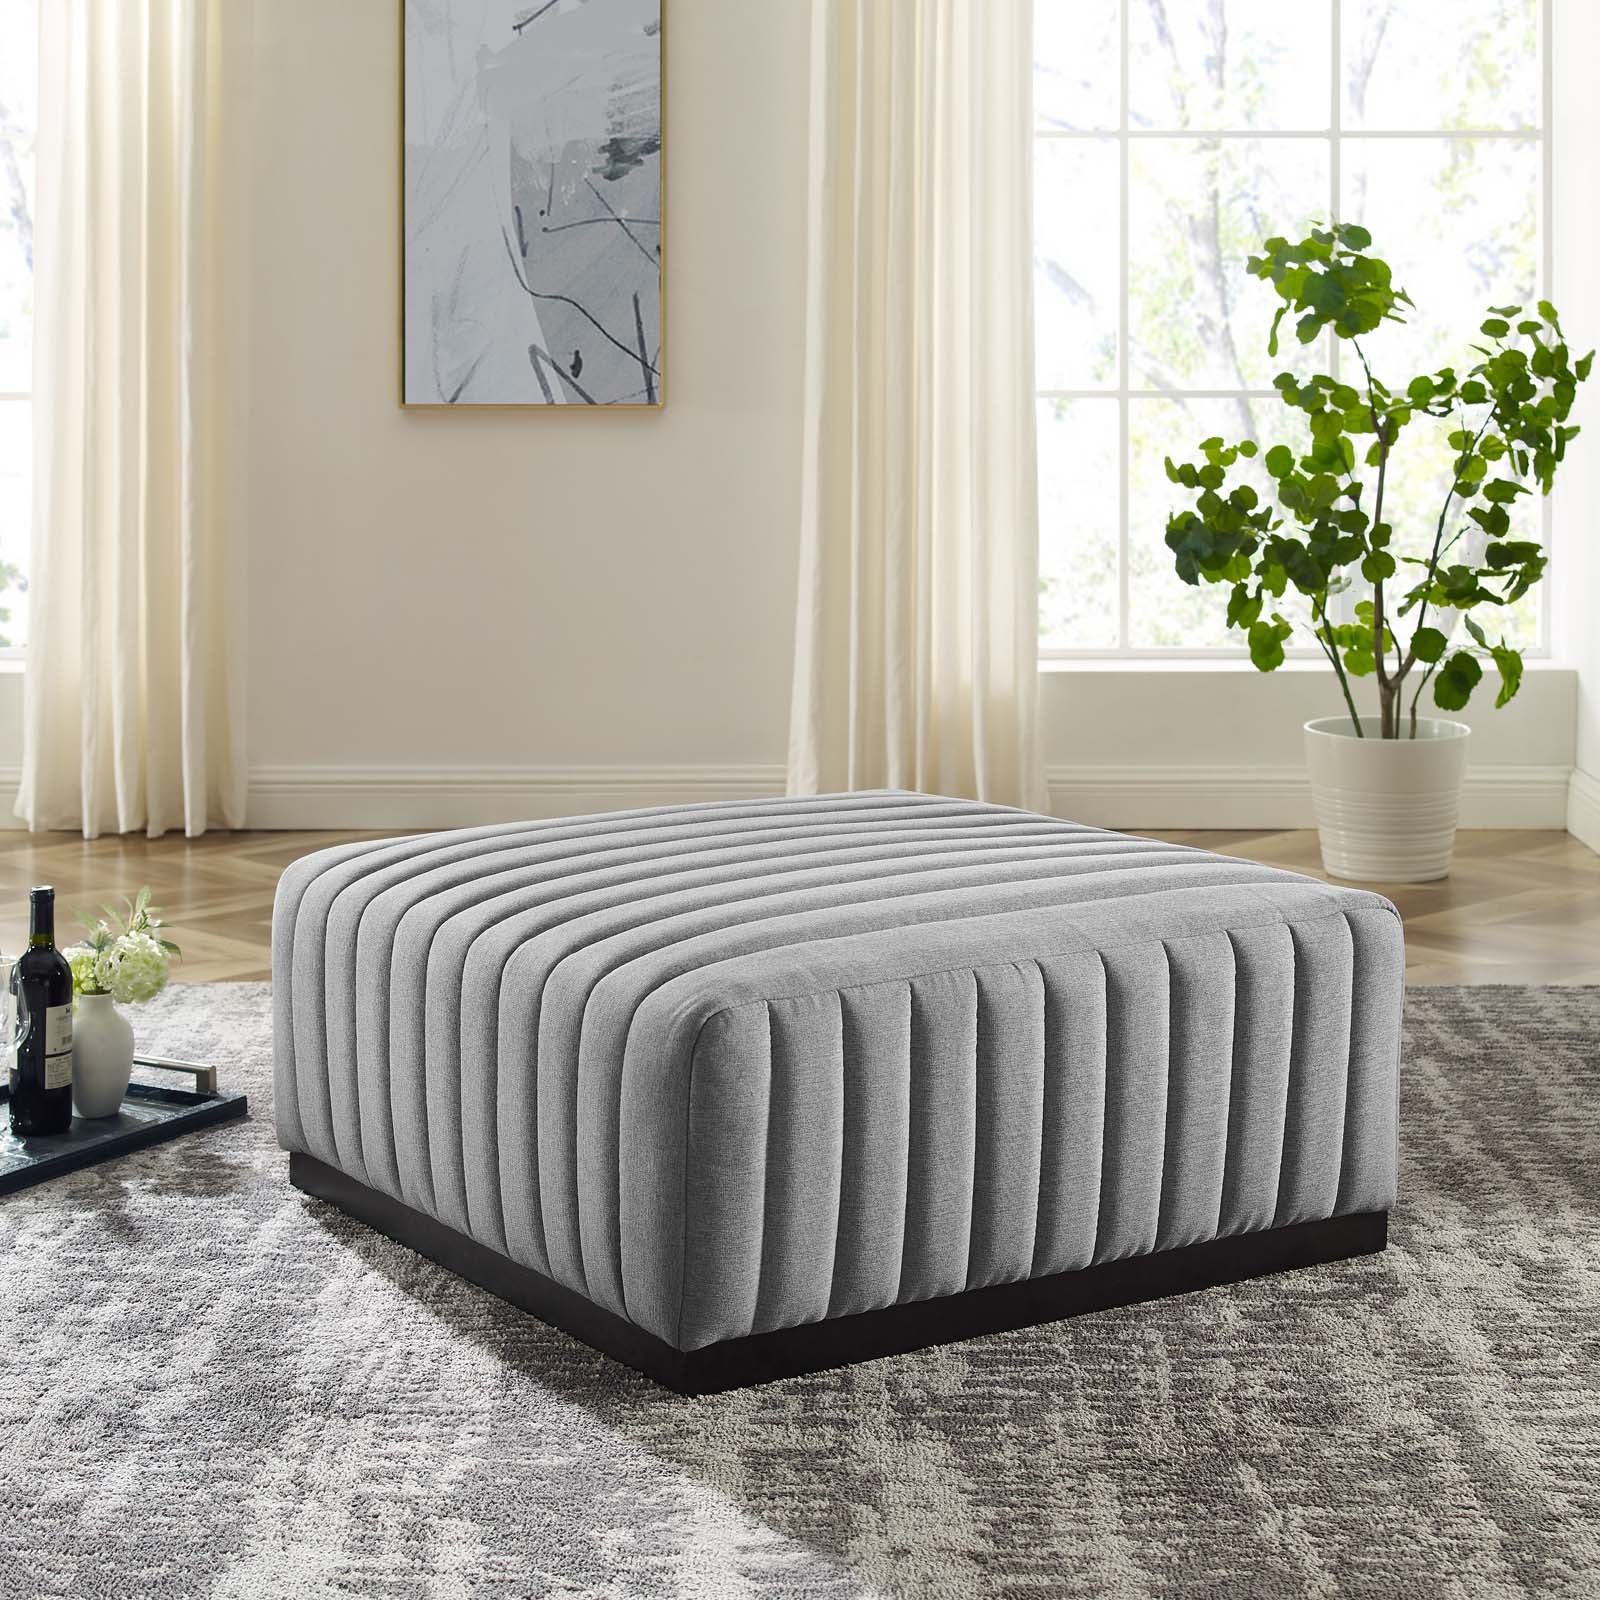 Modway Ottomans & Stools - Conjure Channel Tufted Upholstered Fabric Ottoman Black Light Gray